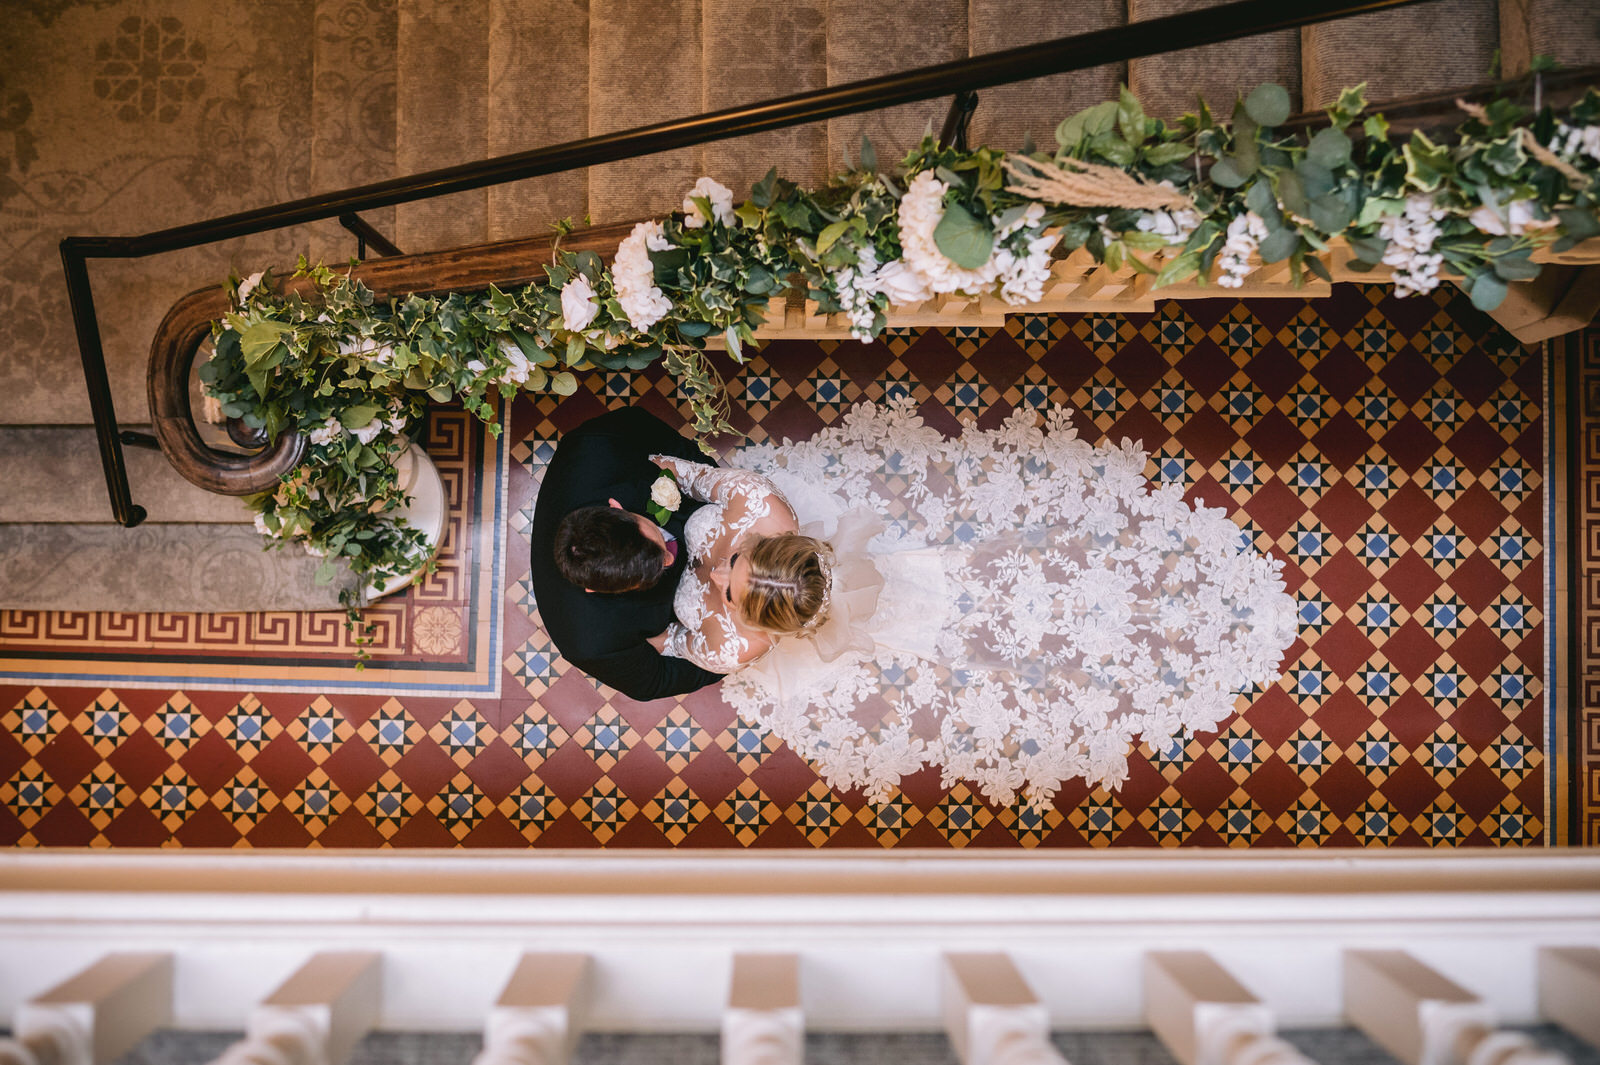 Top down photograph of a Bride & Groom from top of stairs at Old Palace Chester wedding